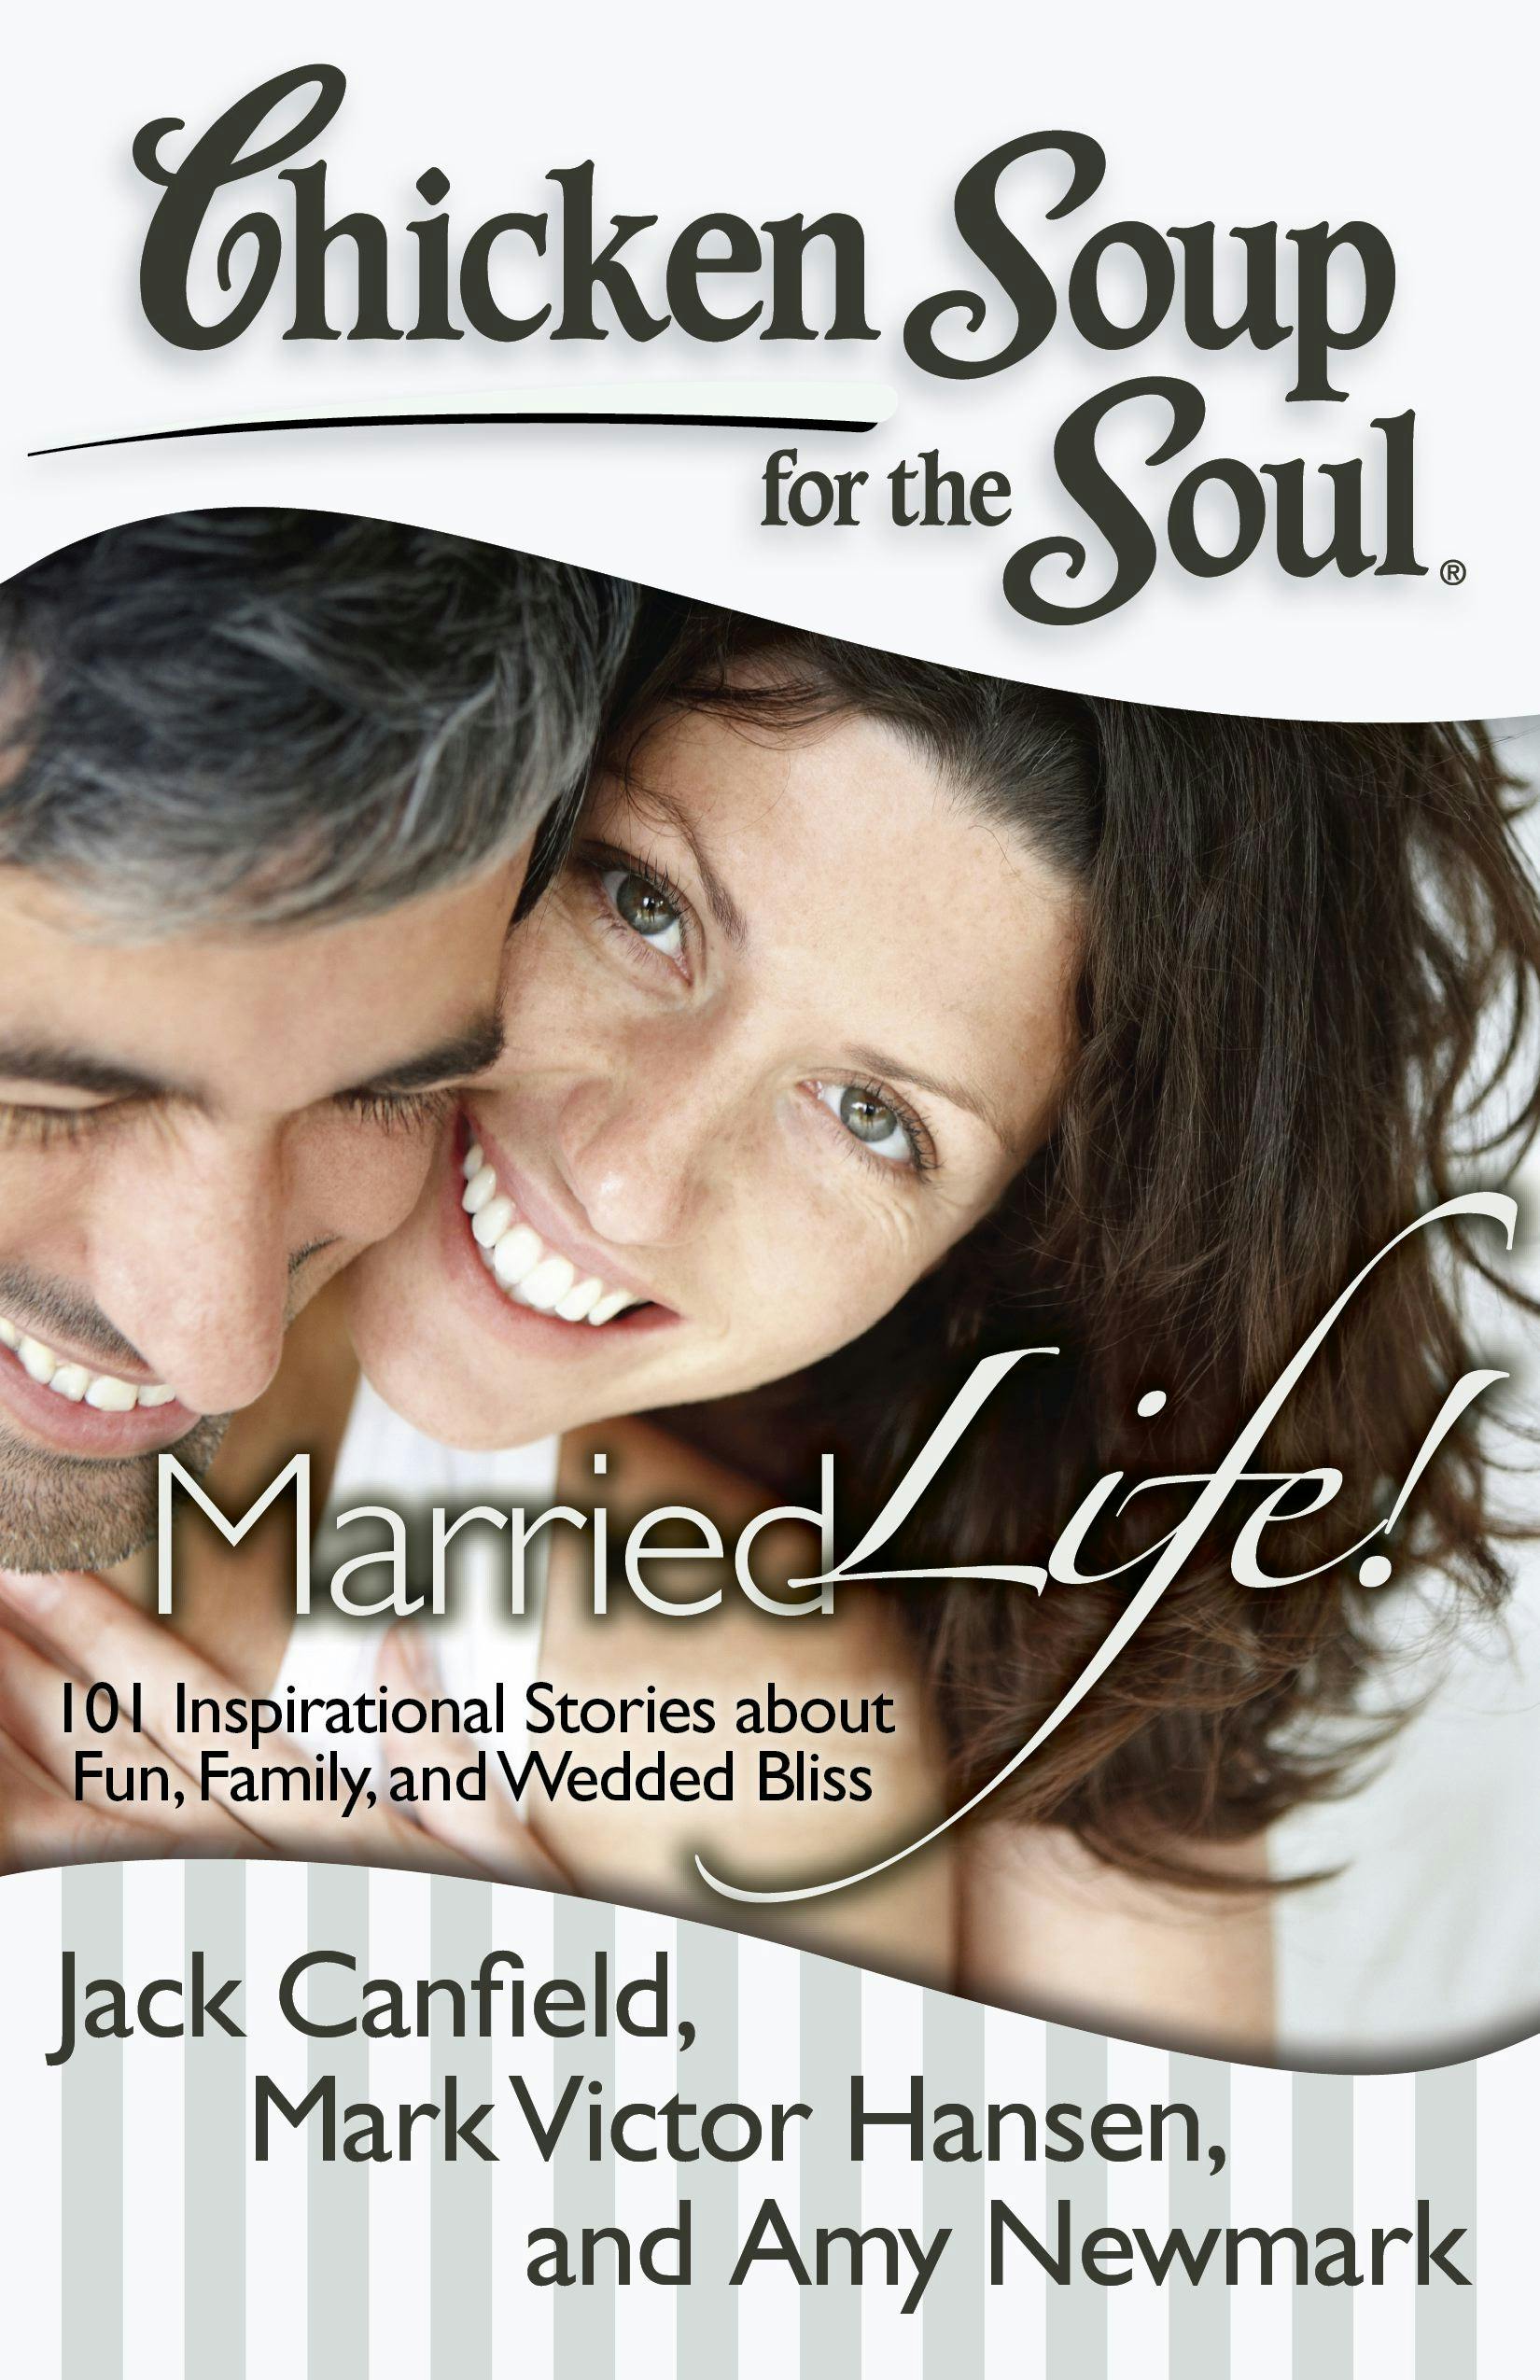 Chicken Soup for the Soul: Married Life!: 101 Inspirational Stories about Fun, Family, and Wedded Bliss - Mark Victor Hansen, Jack Canfield, Amy Newmark